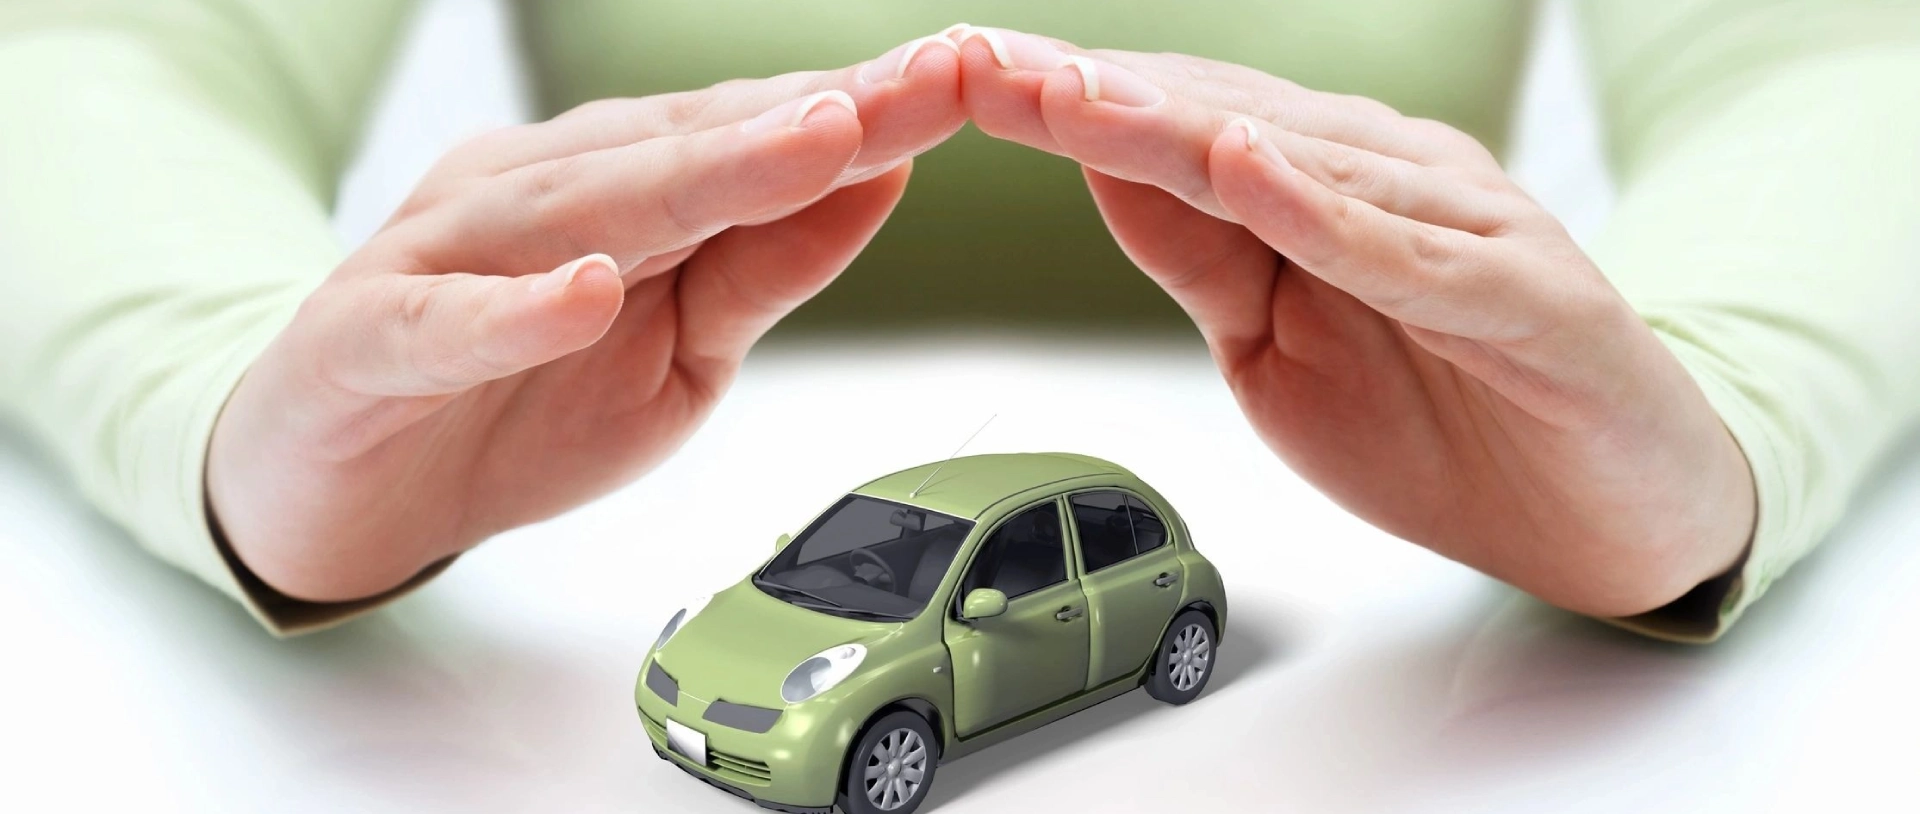 A green car is being protected by two hands.